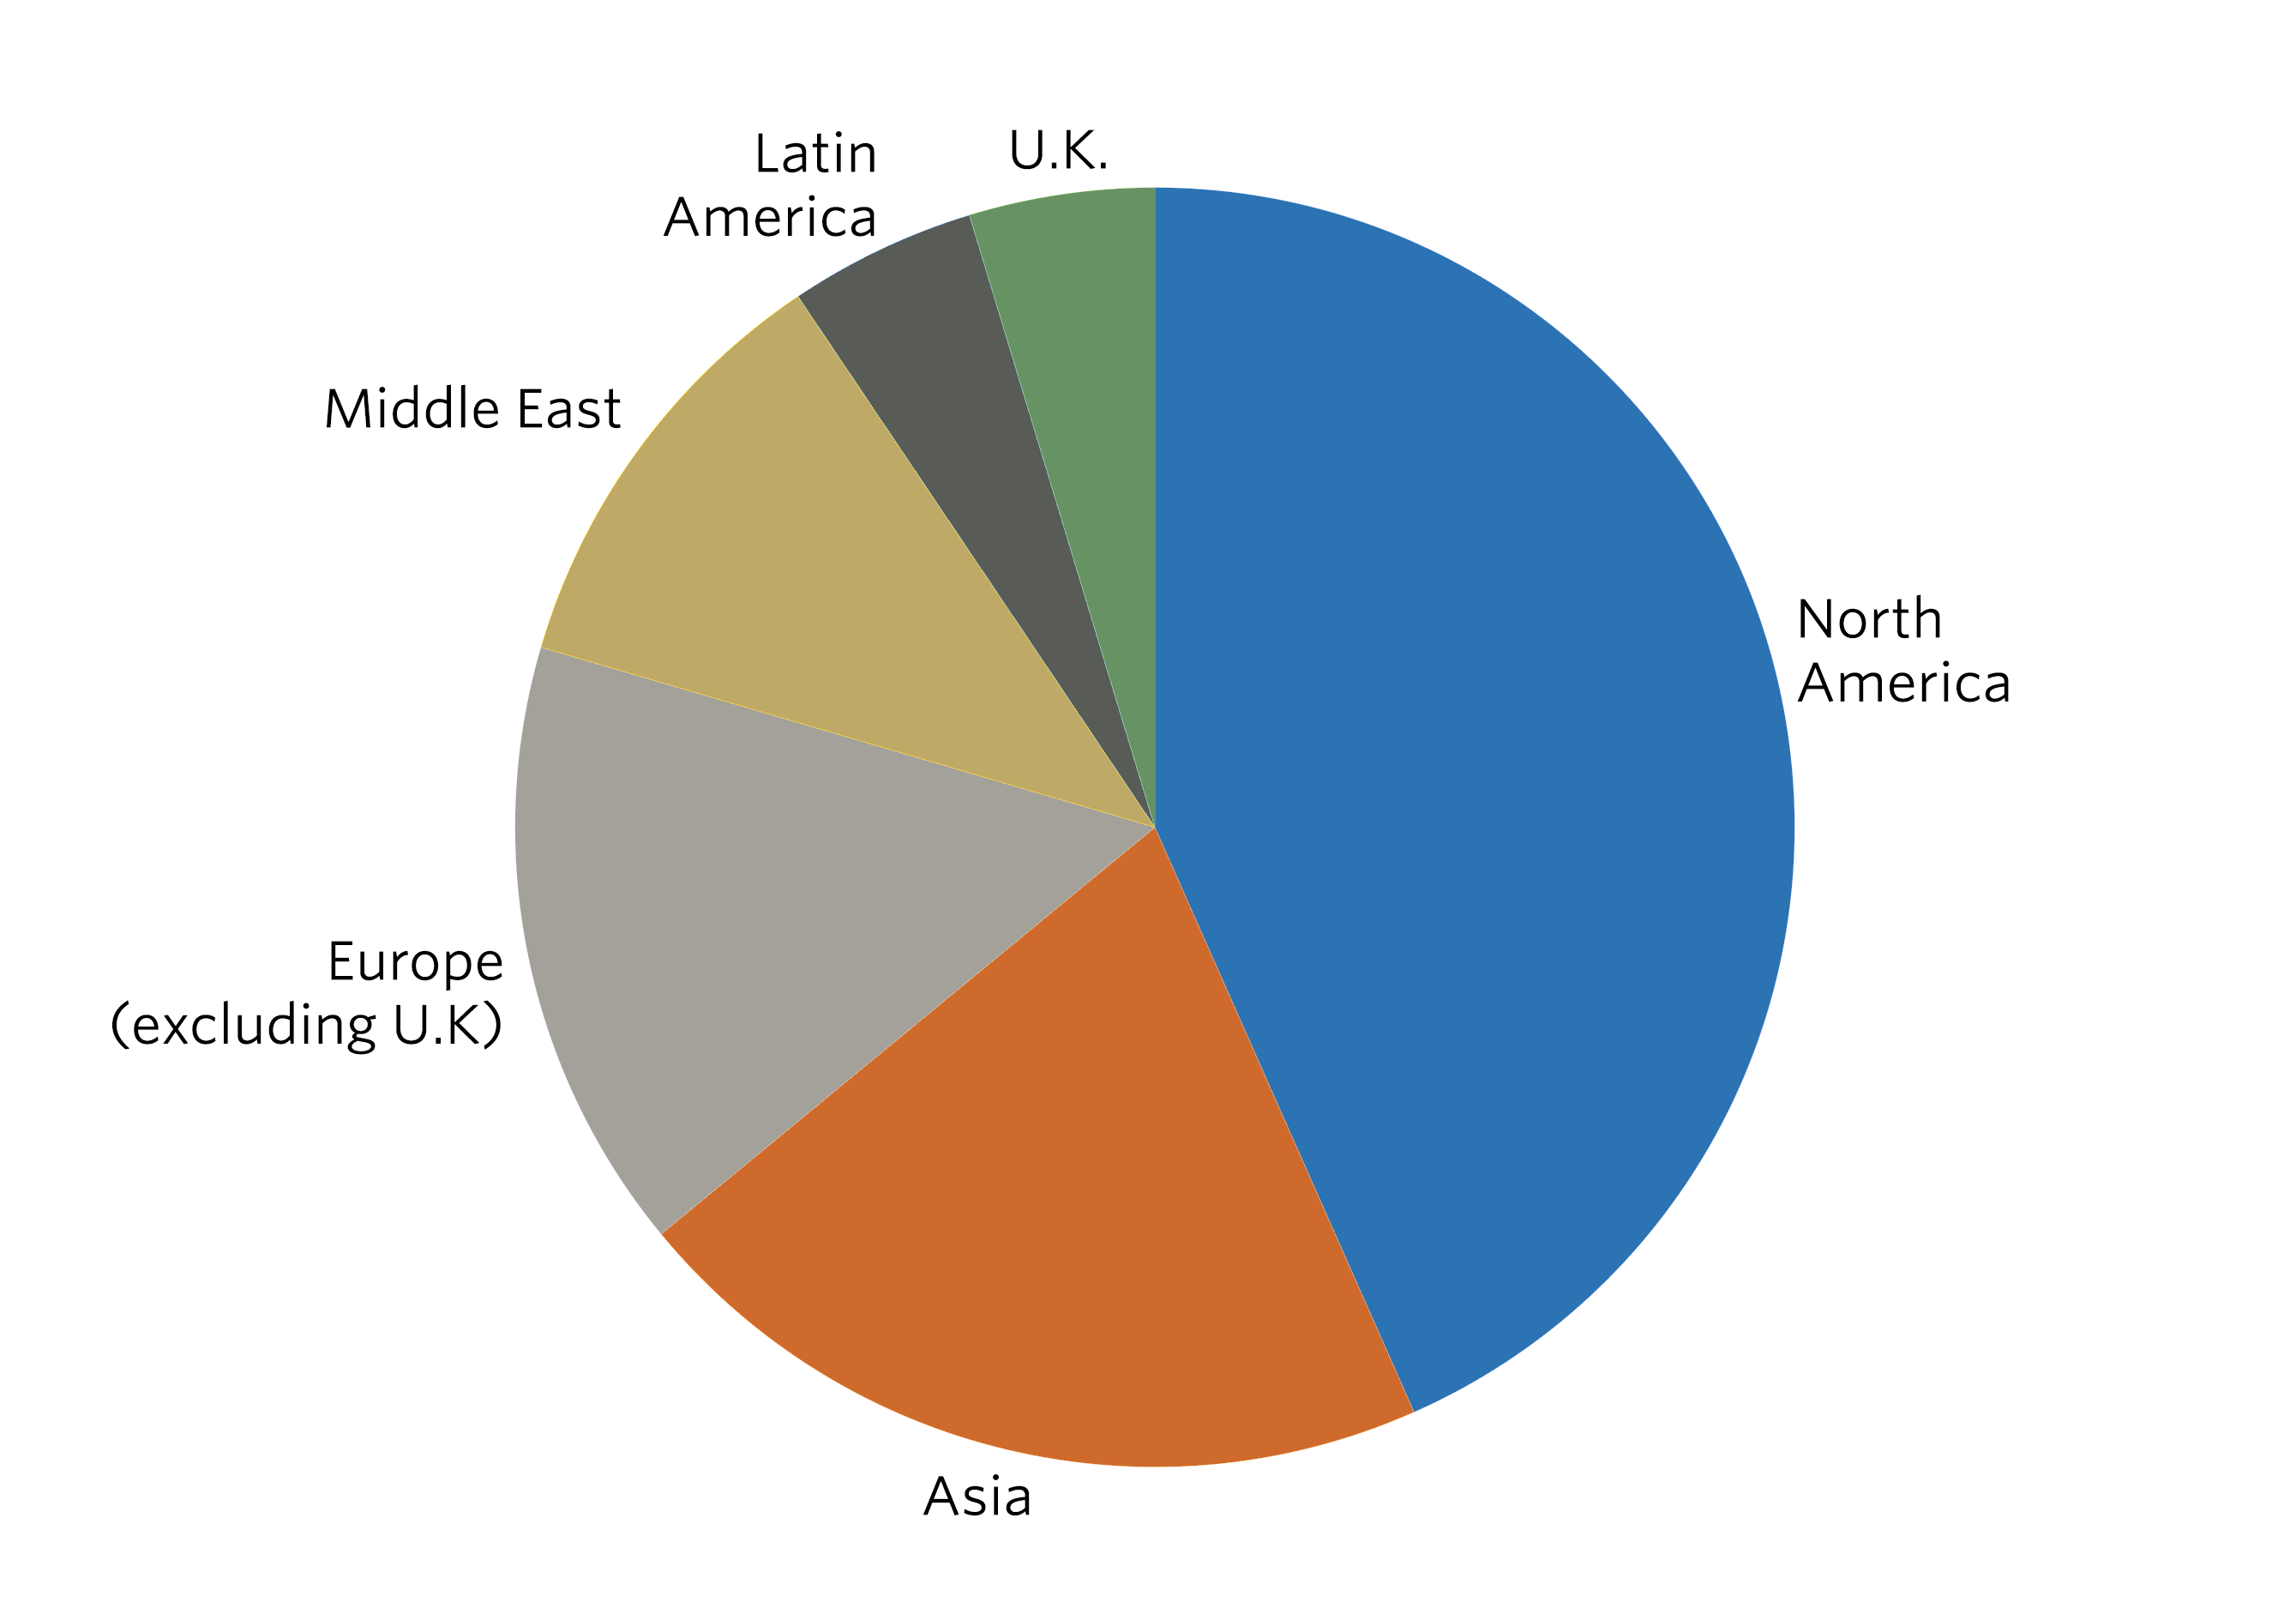 Pie chart showing Investors by Geography. Sections include: North America (43.36%), Asia (20.67%), Europe [excluding U.K.] (15.51%), U.K. (4.68%), Middle East (11.04%), and Latin America (4.74%).